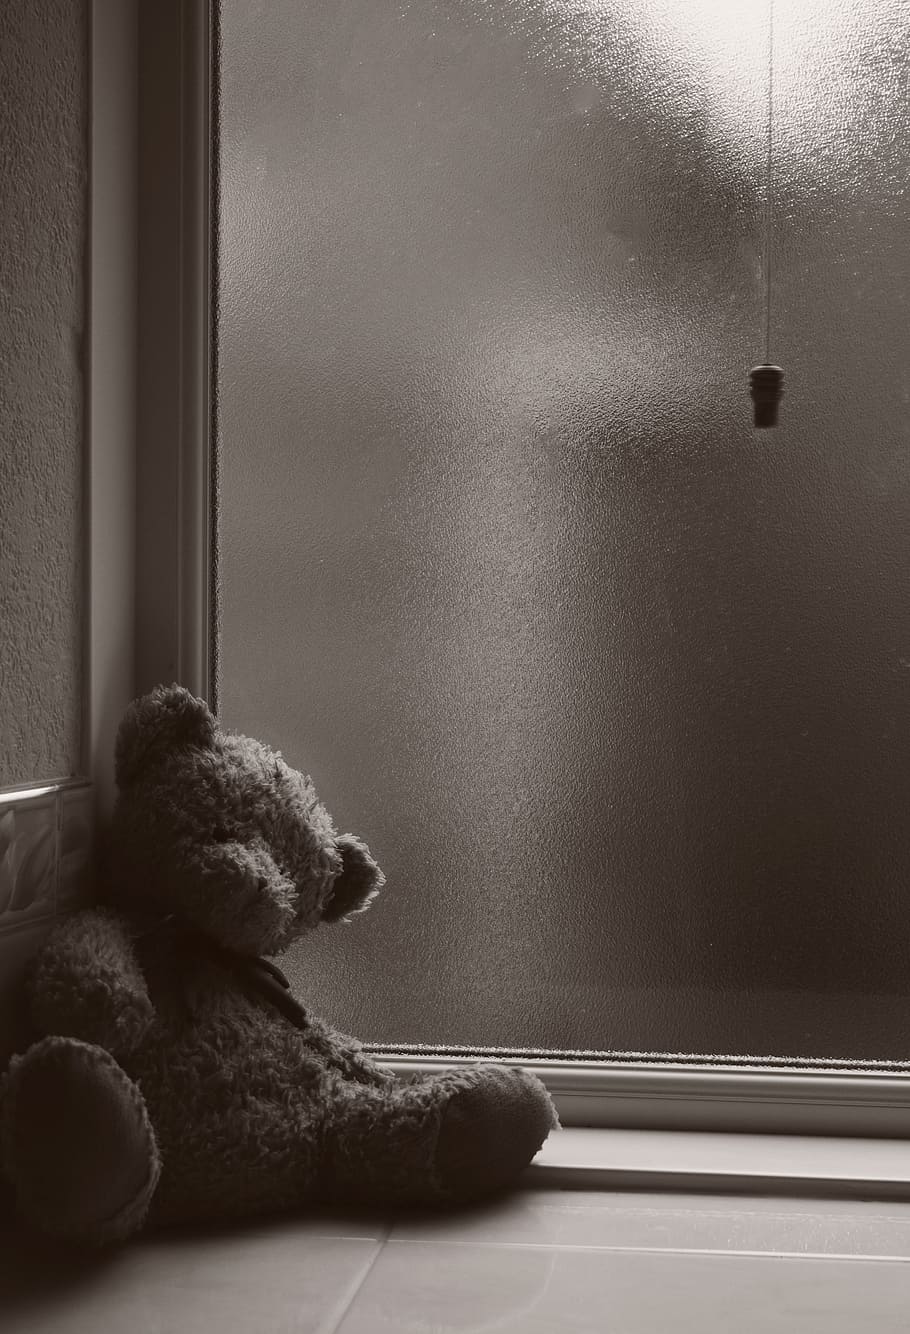 brown bear plush toy lean on wall near window, Abandoned, Cold